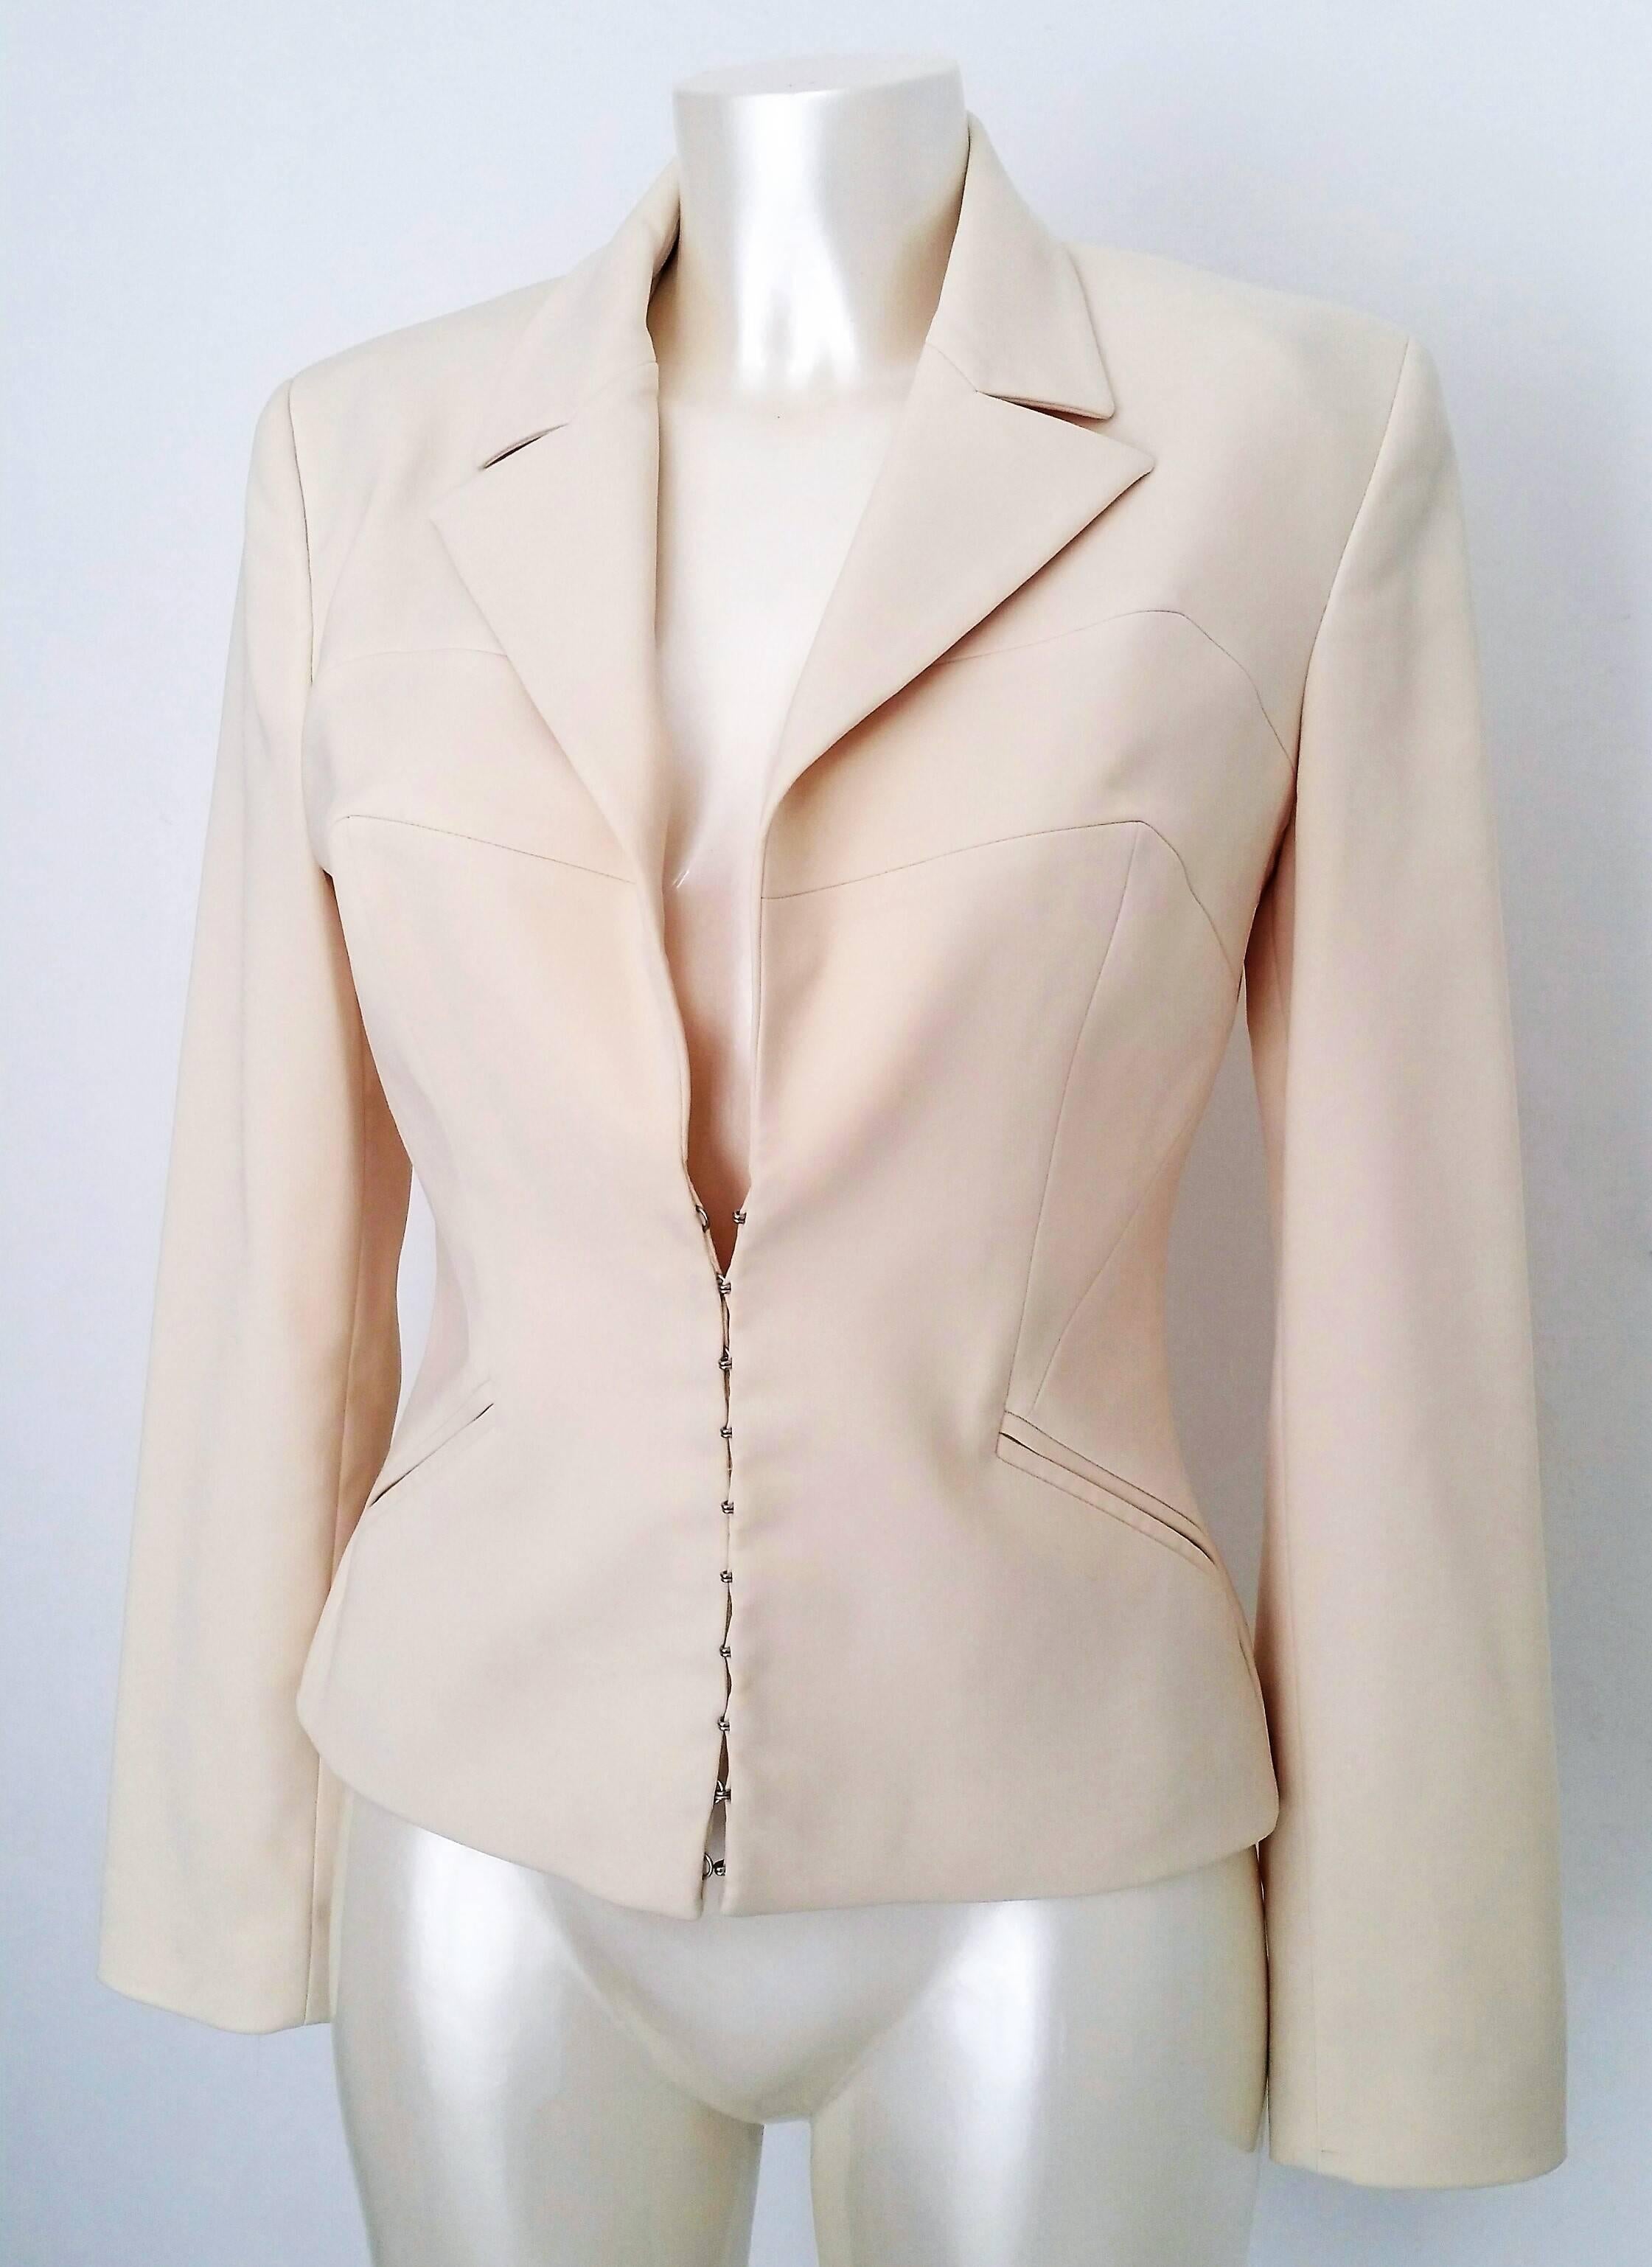 1990s Gianni Versace cream jacket
Totally made in italy
Size: 42 italian size range 